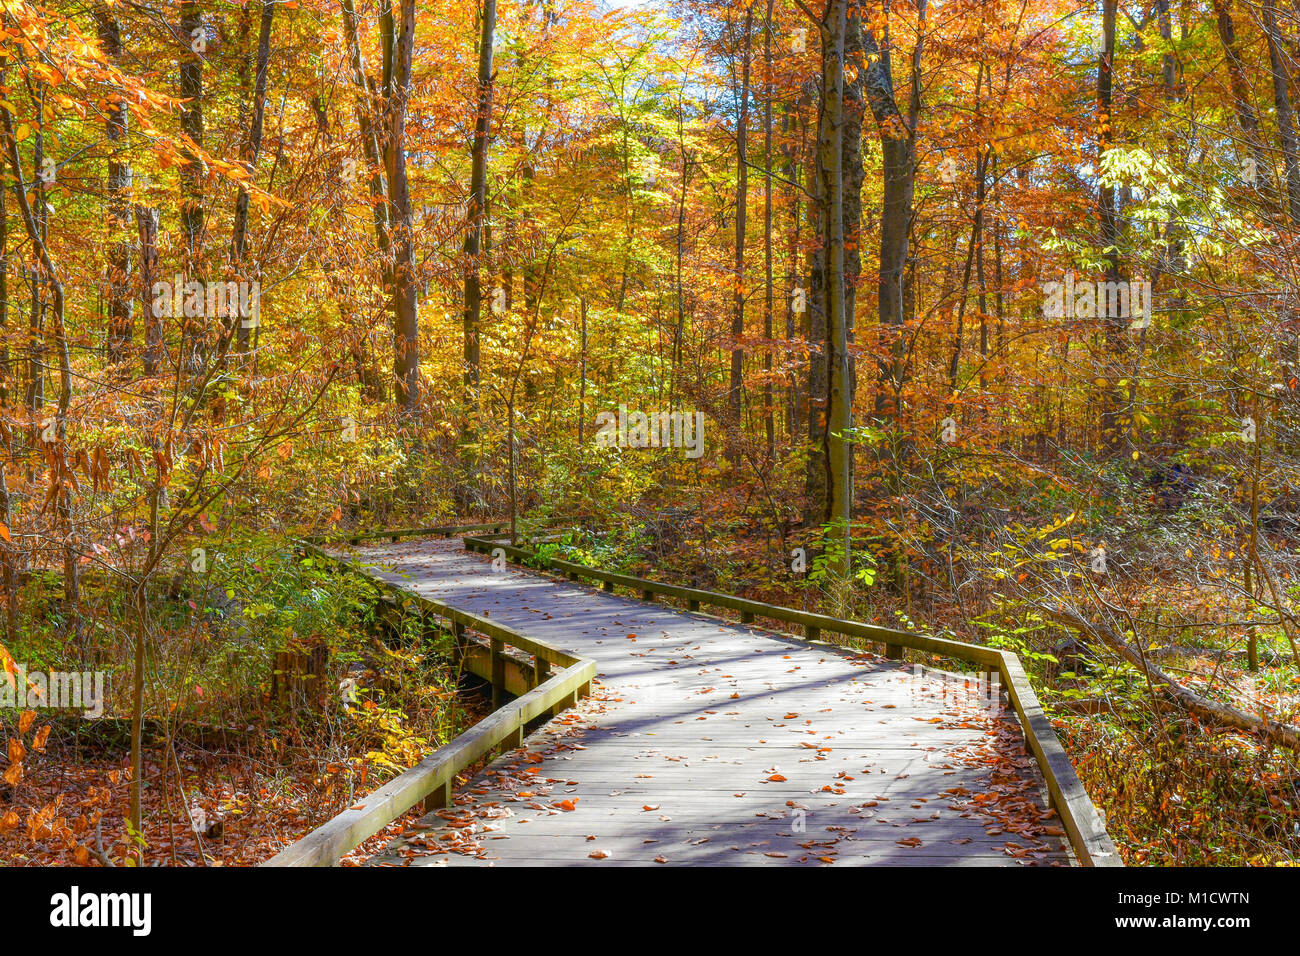 A winding wooden trail through the woods at the peak of fall color. Trees line the path. Stock Photo